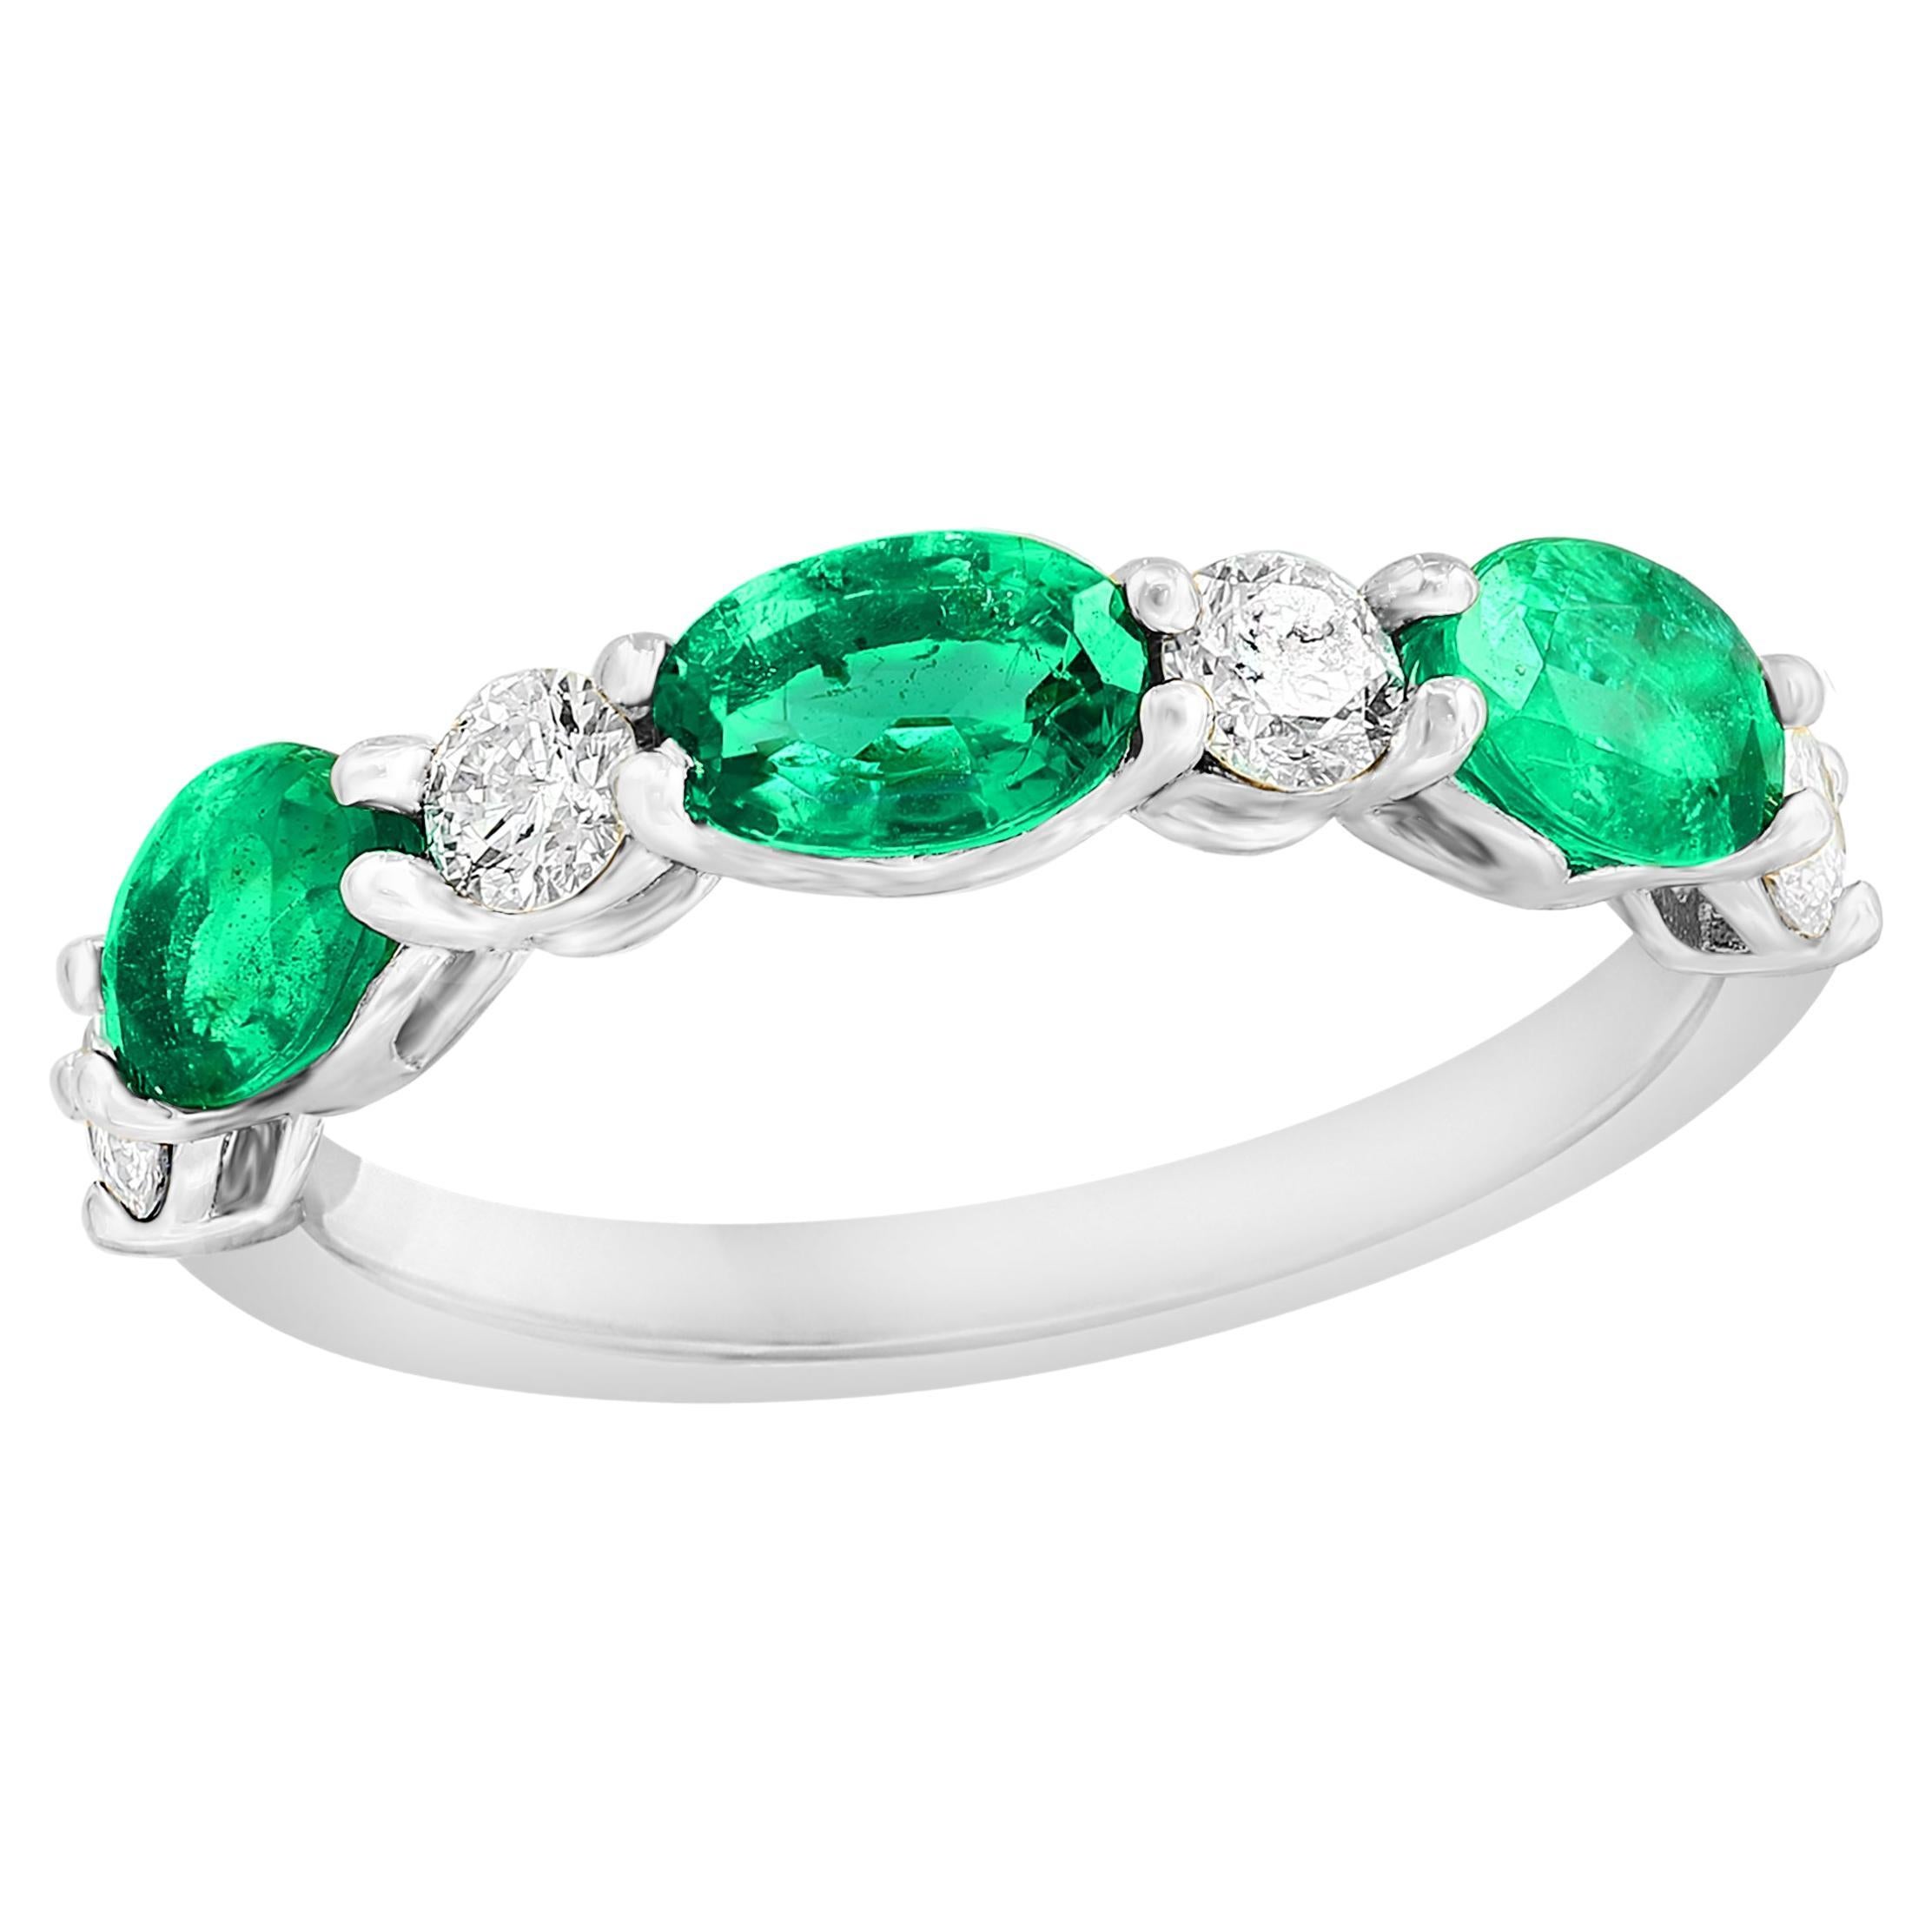 1.27 Carat Oval Cut Emerald and Diamond Band in 14K White Gold For Sale